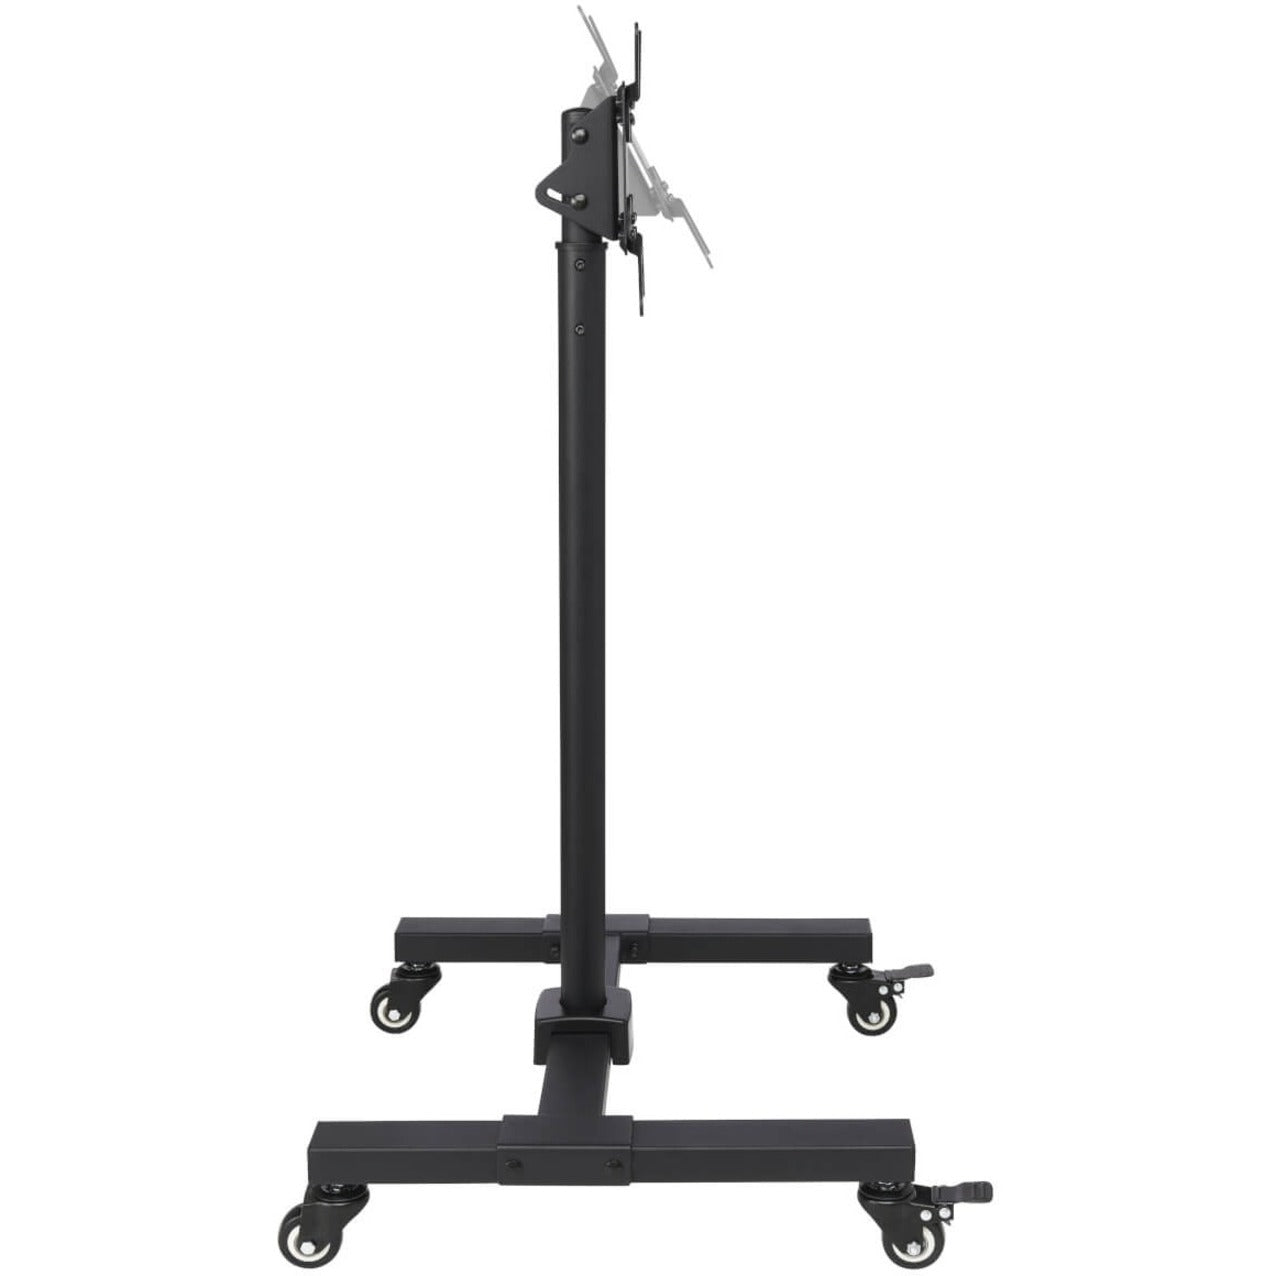 Tripp Lite DMC1342S Mobile TV Stand, 13" to 42" TVs and Monitors, Durable, Telescoping, Sturdy, Swivel Casters, Adjustable Angle, Powder Coated, Mobility, Tilt, Swivel, Cable Management, Scratch Resistant